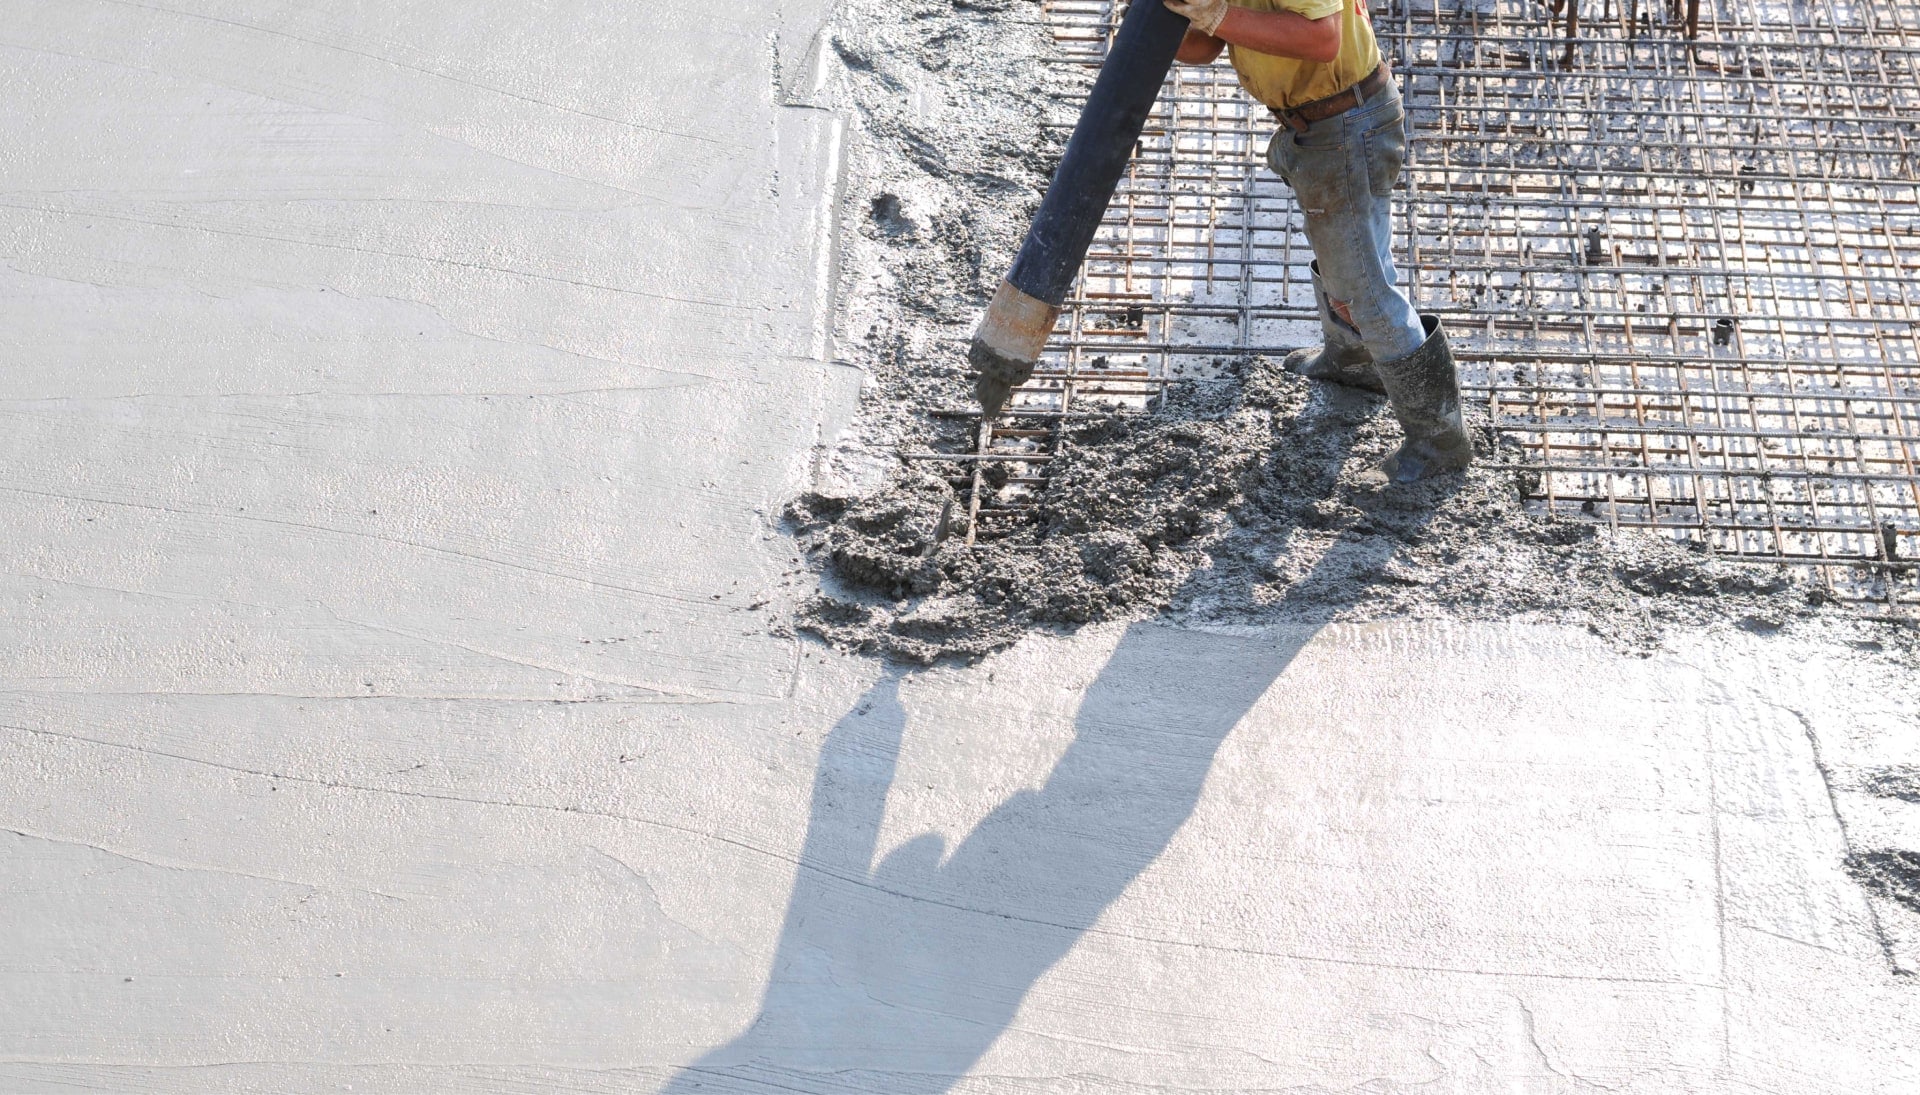 High-Quality Concrete Foundation Services Muskegon, MI Trust Experienced Contractors for Strong Concrete Foundations for Residential or Commercial Projects.